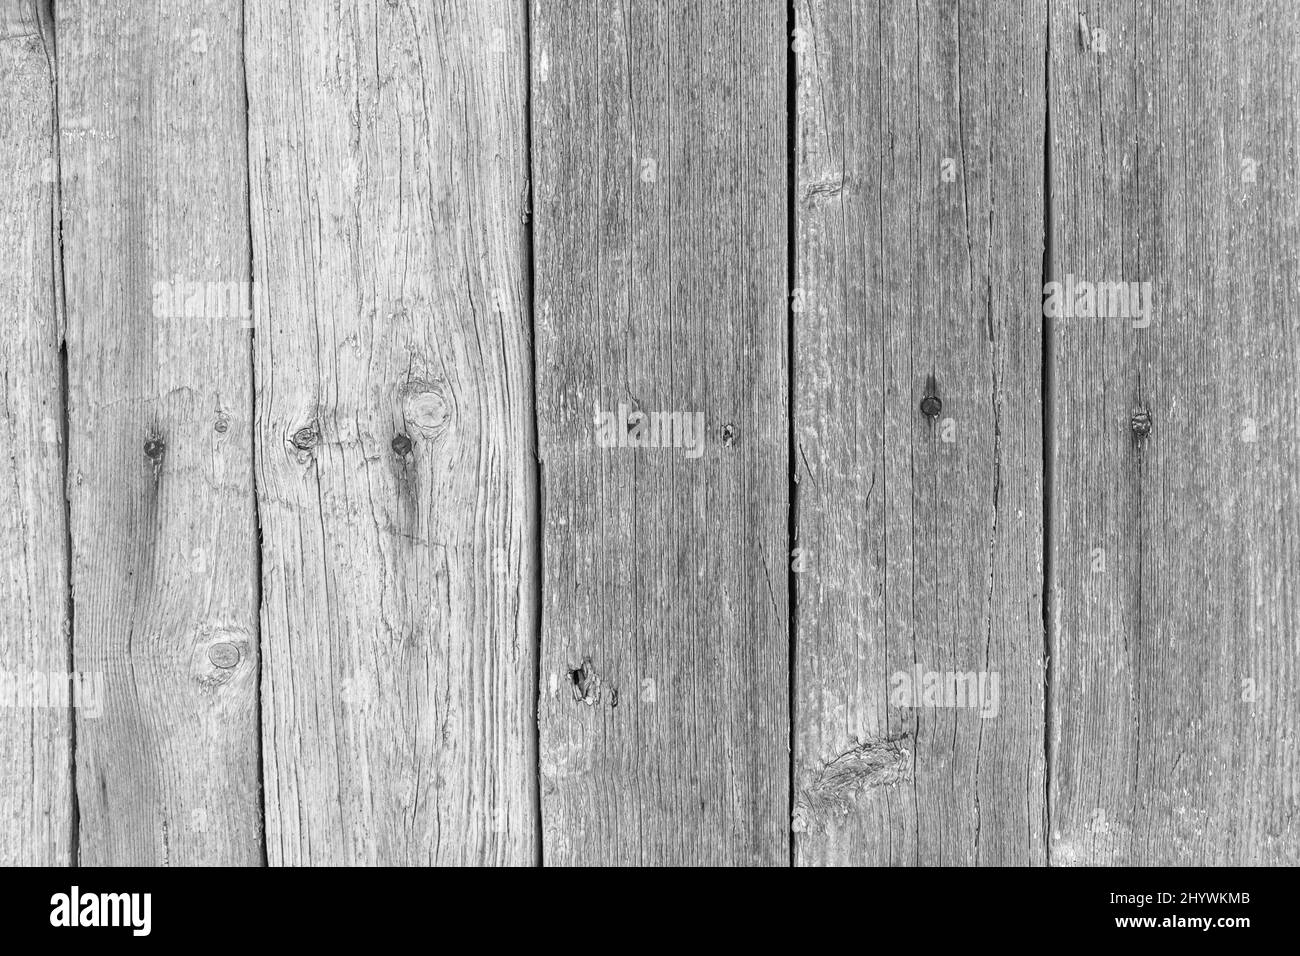 Old wooden fence texture and high detailed background photo with nails Stock Photo